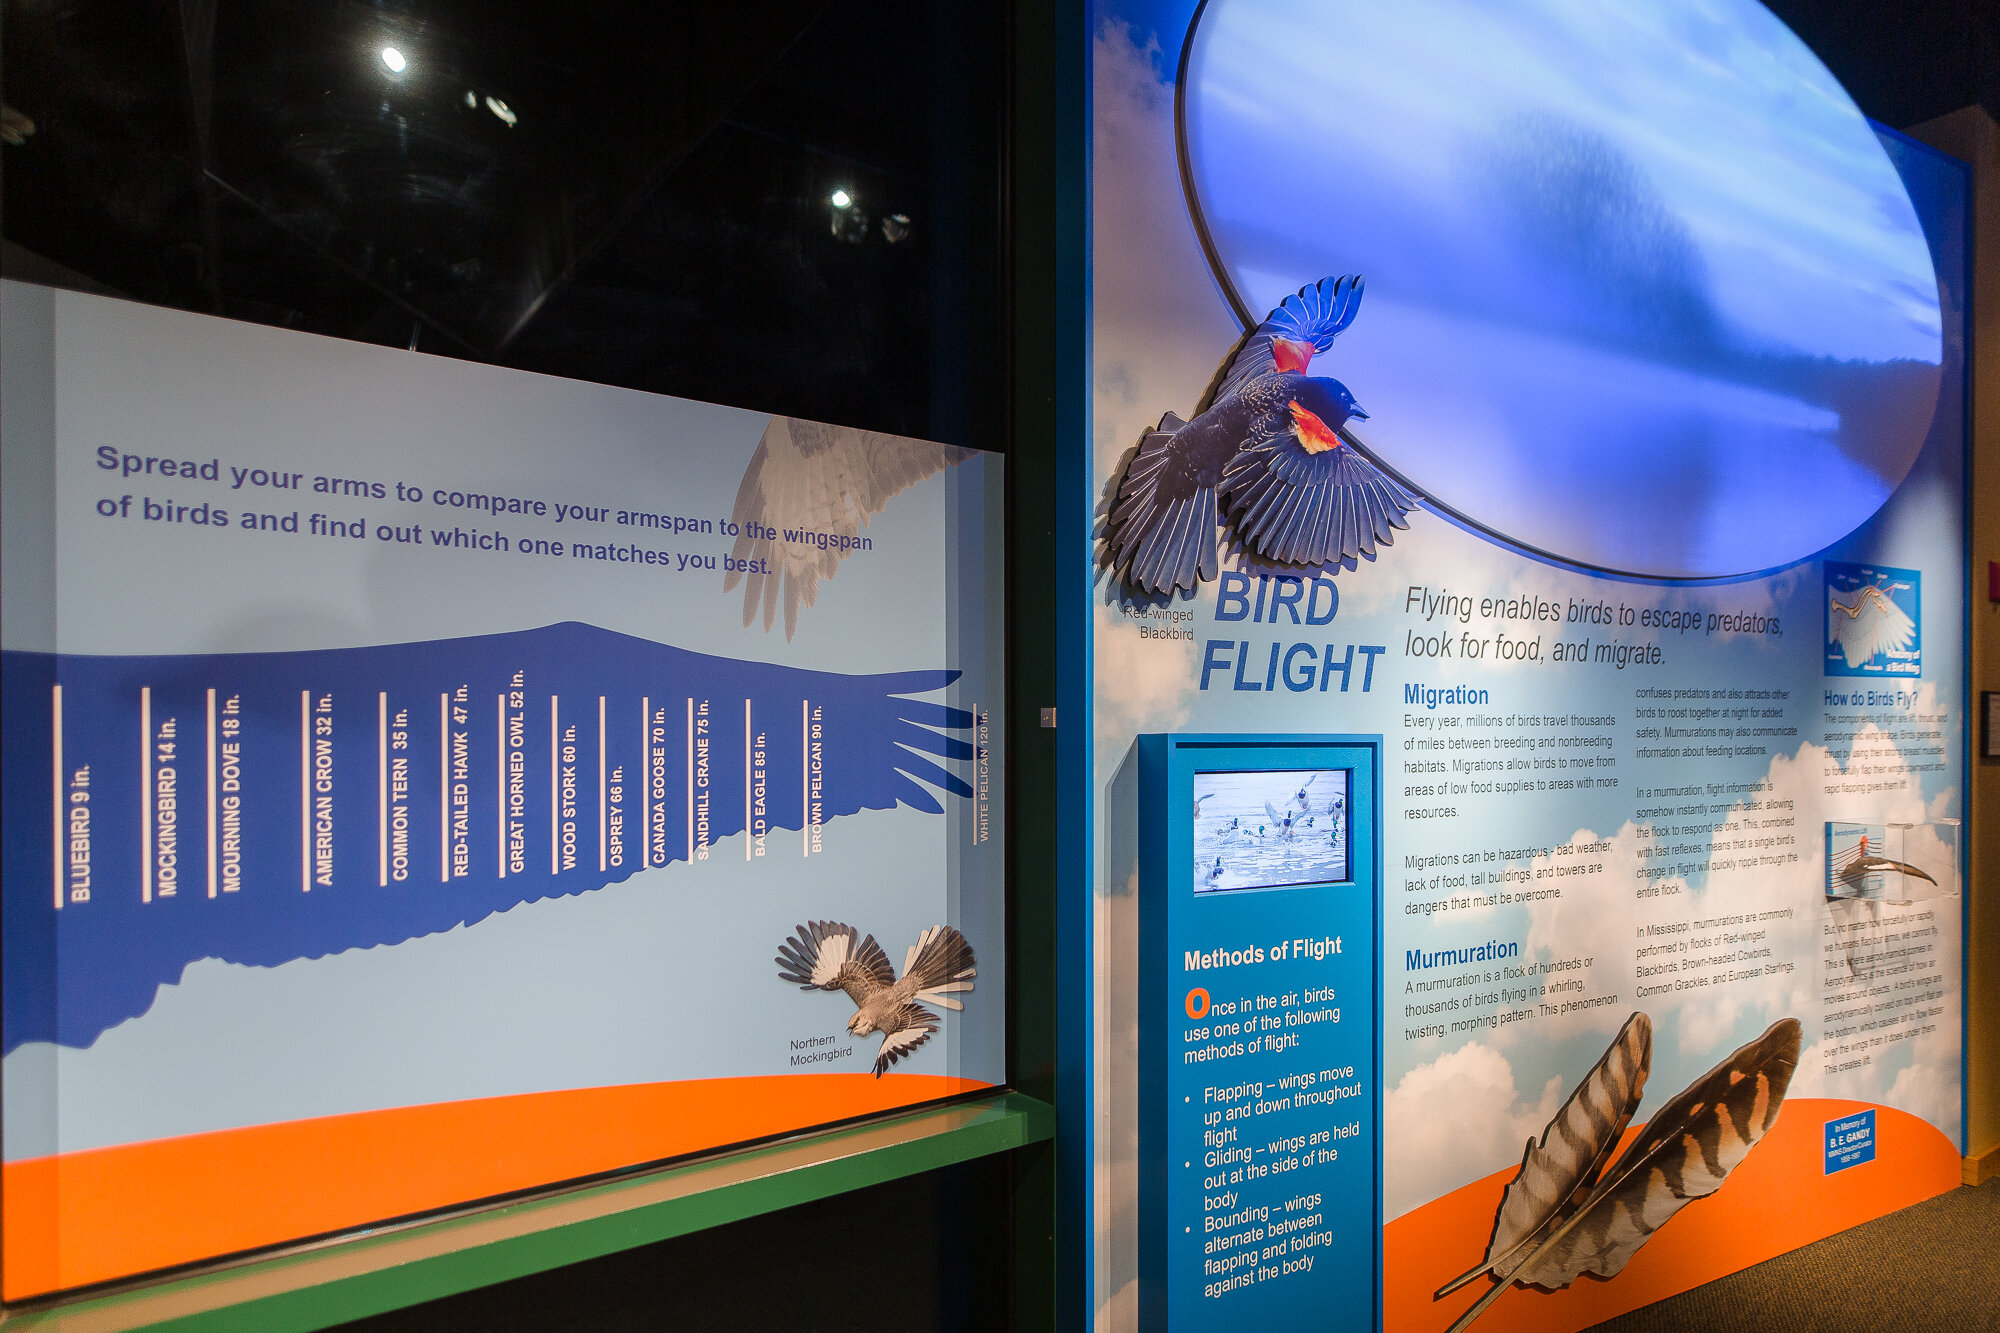 bird flight permanent exhibit at the mississippi museum of natural science